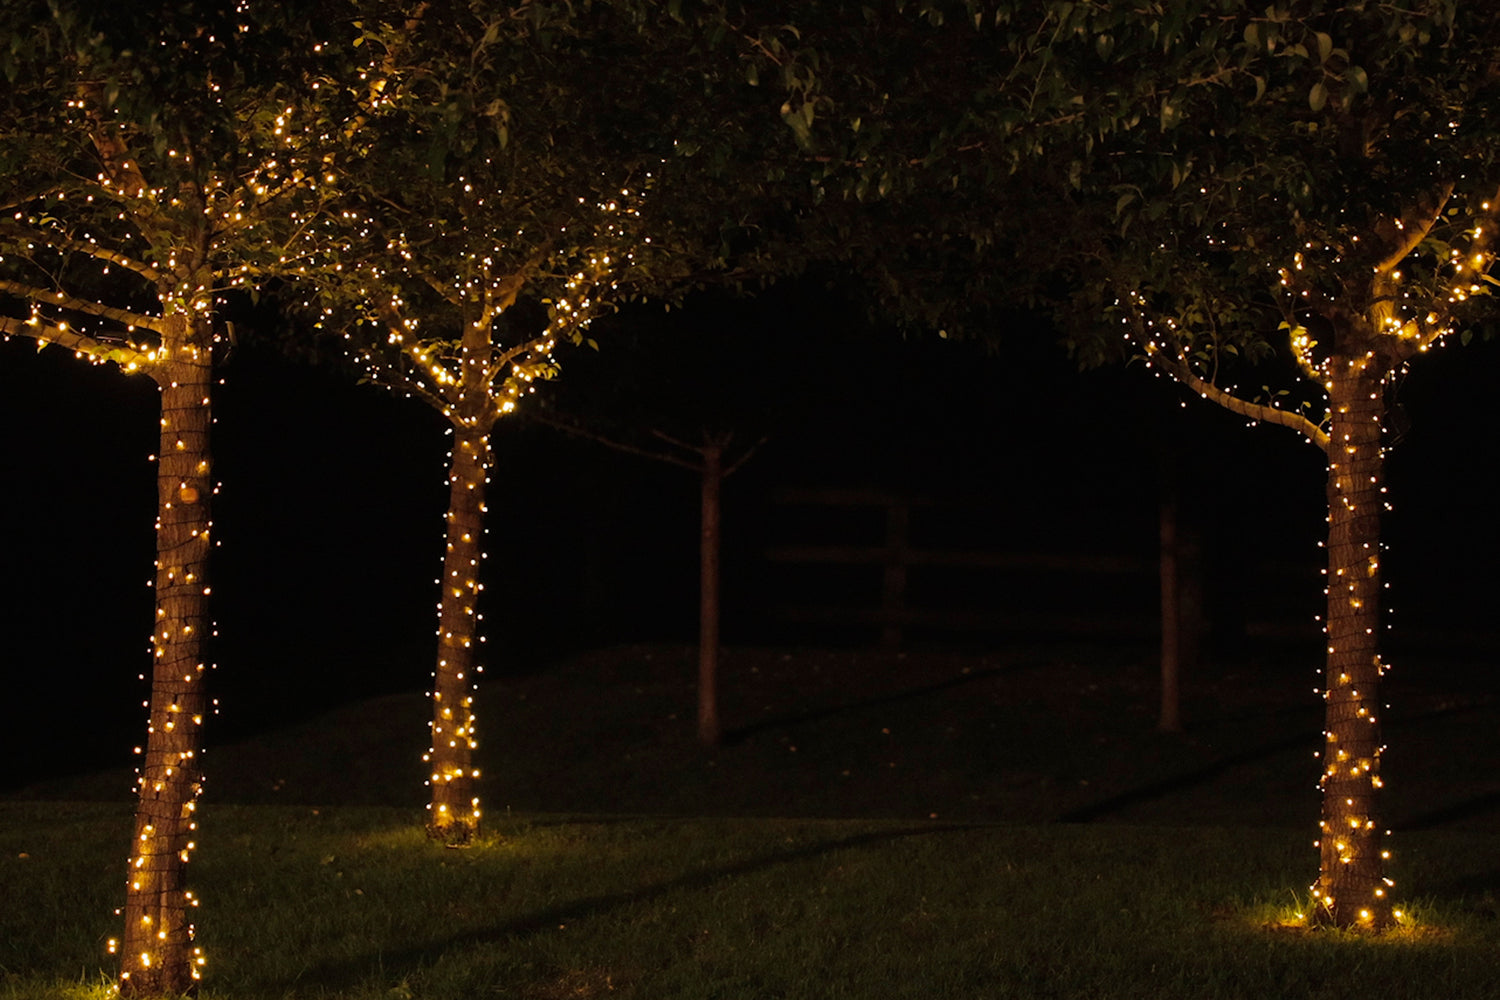 Warm white solar fairy lights wrapped around three trees lit up at night